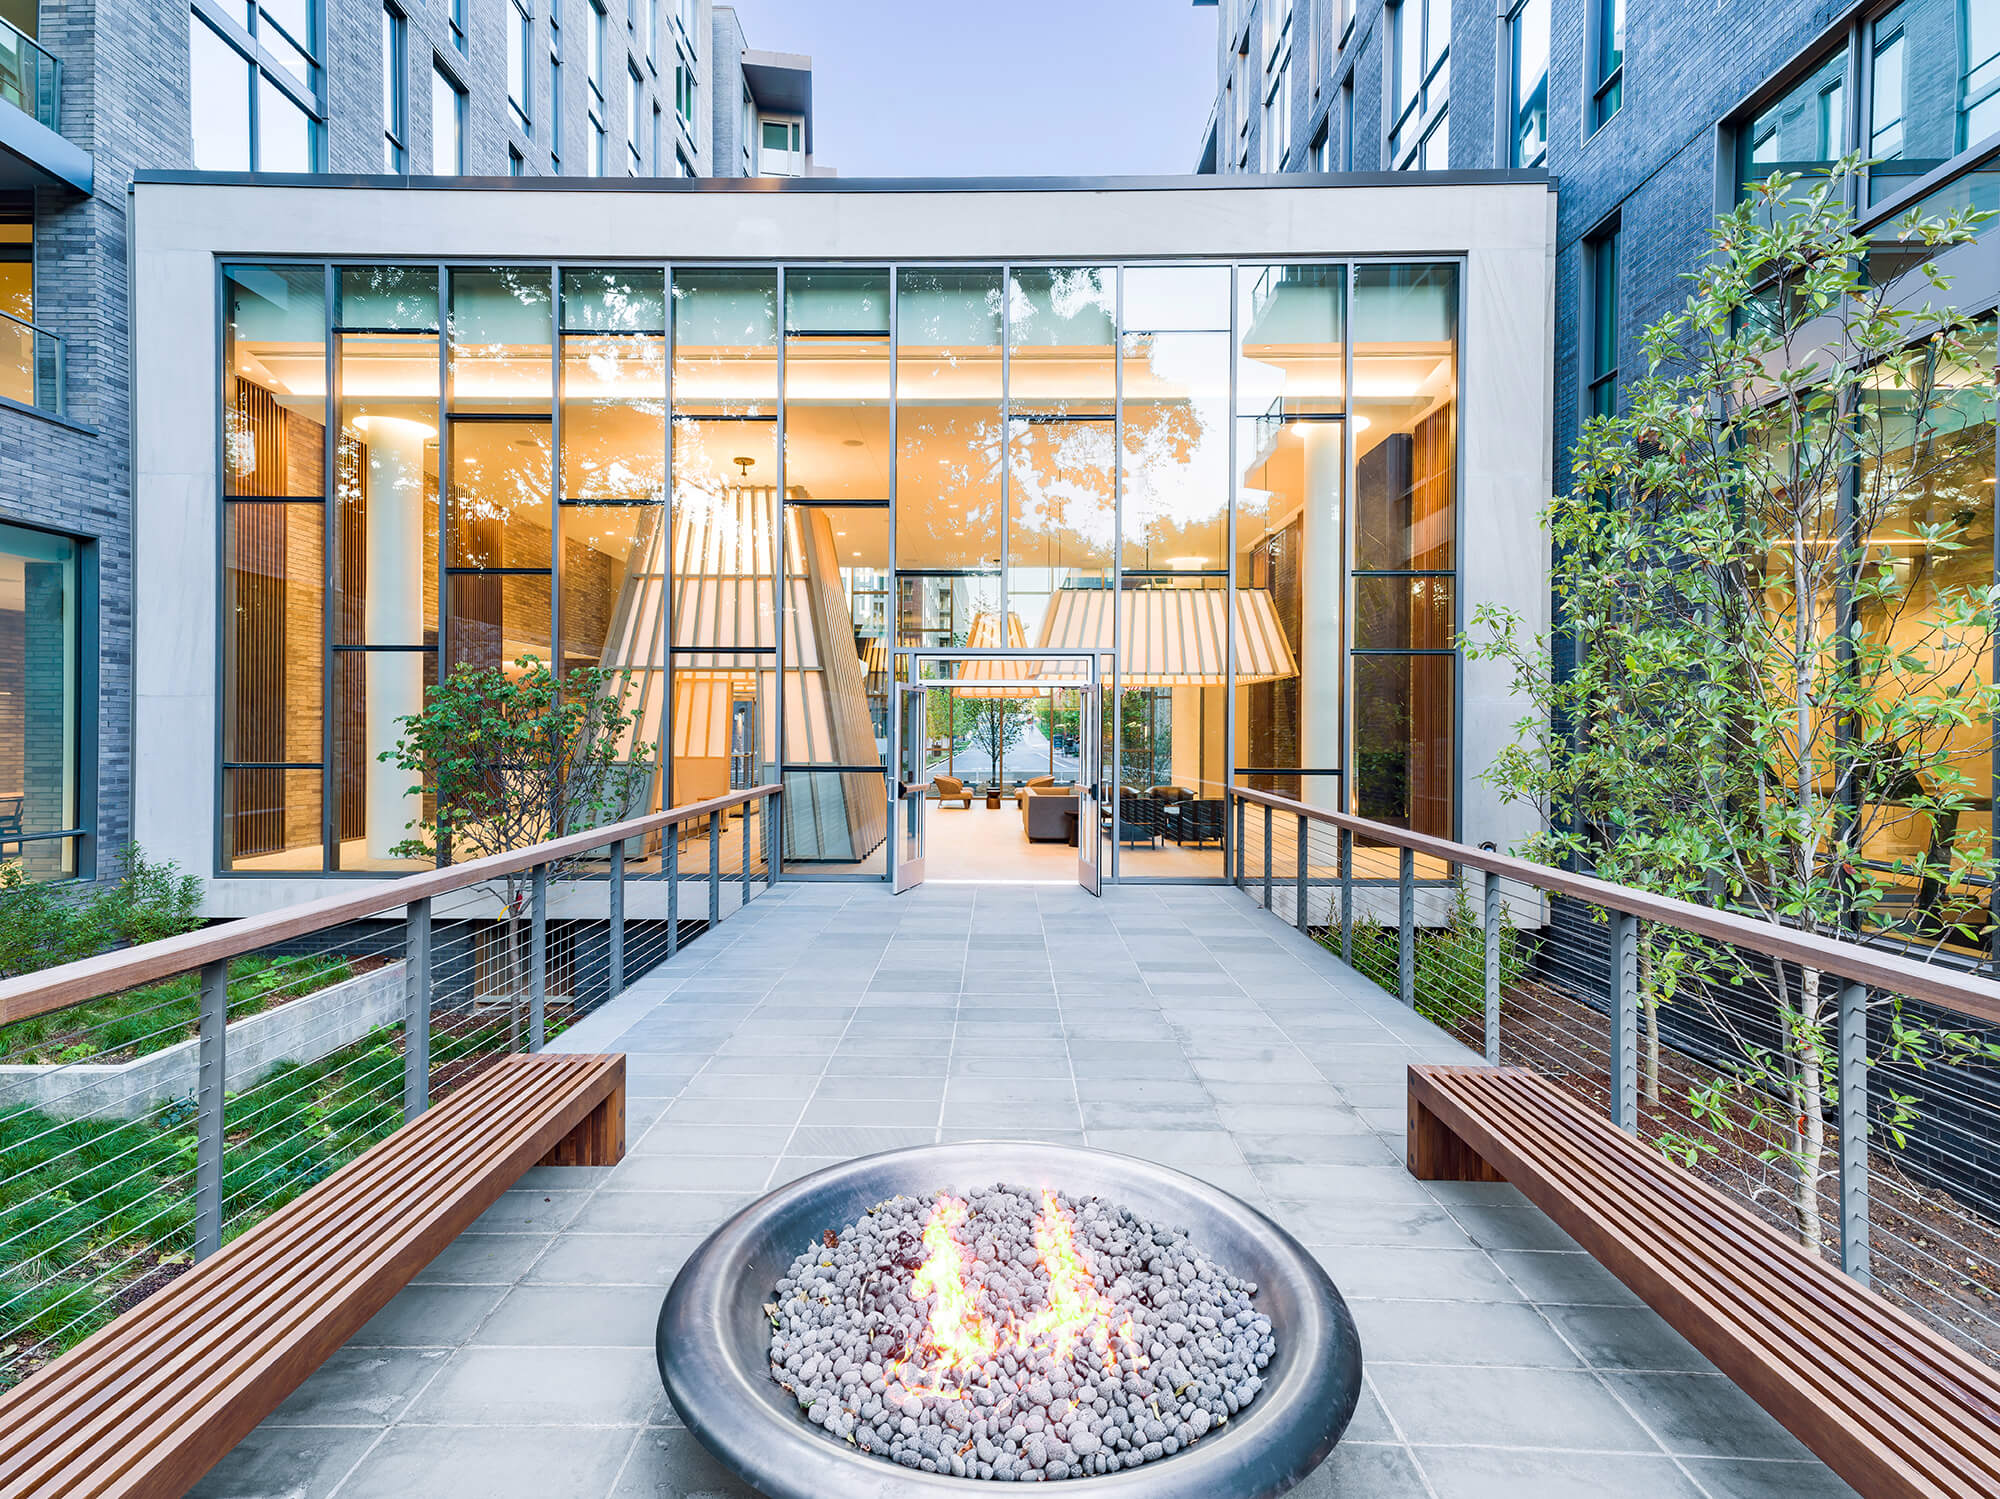 Outdoor amenity spaces that become a haven for discovery and inspiration